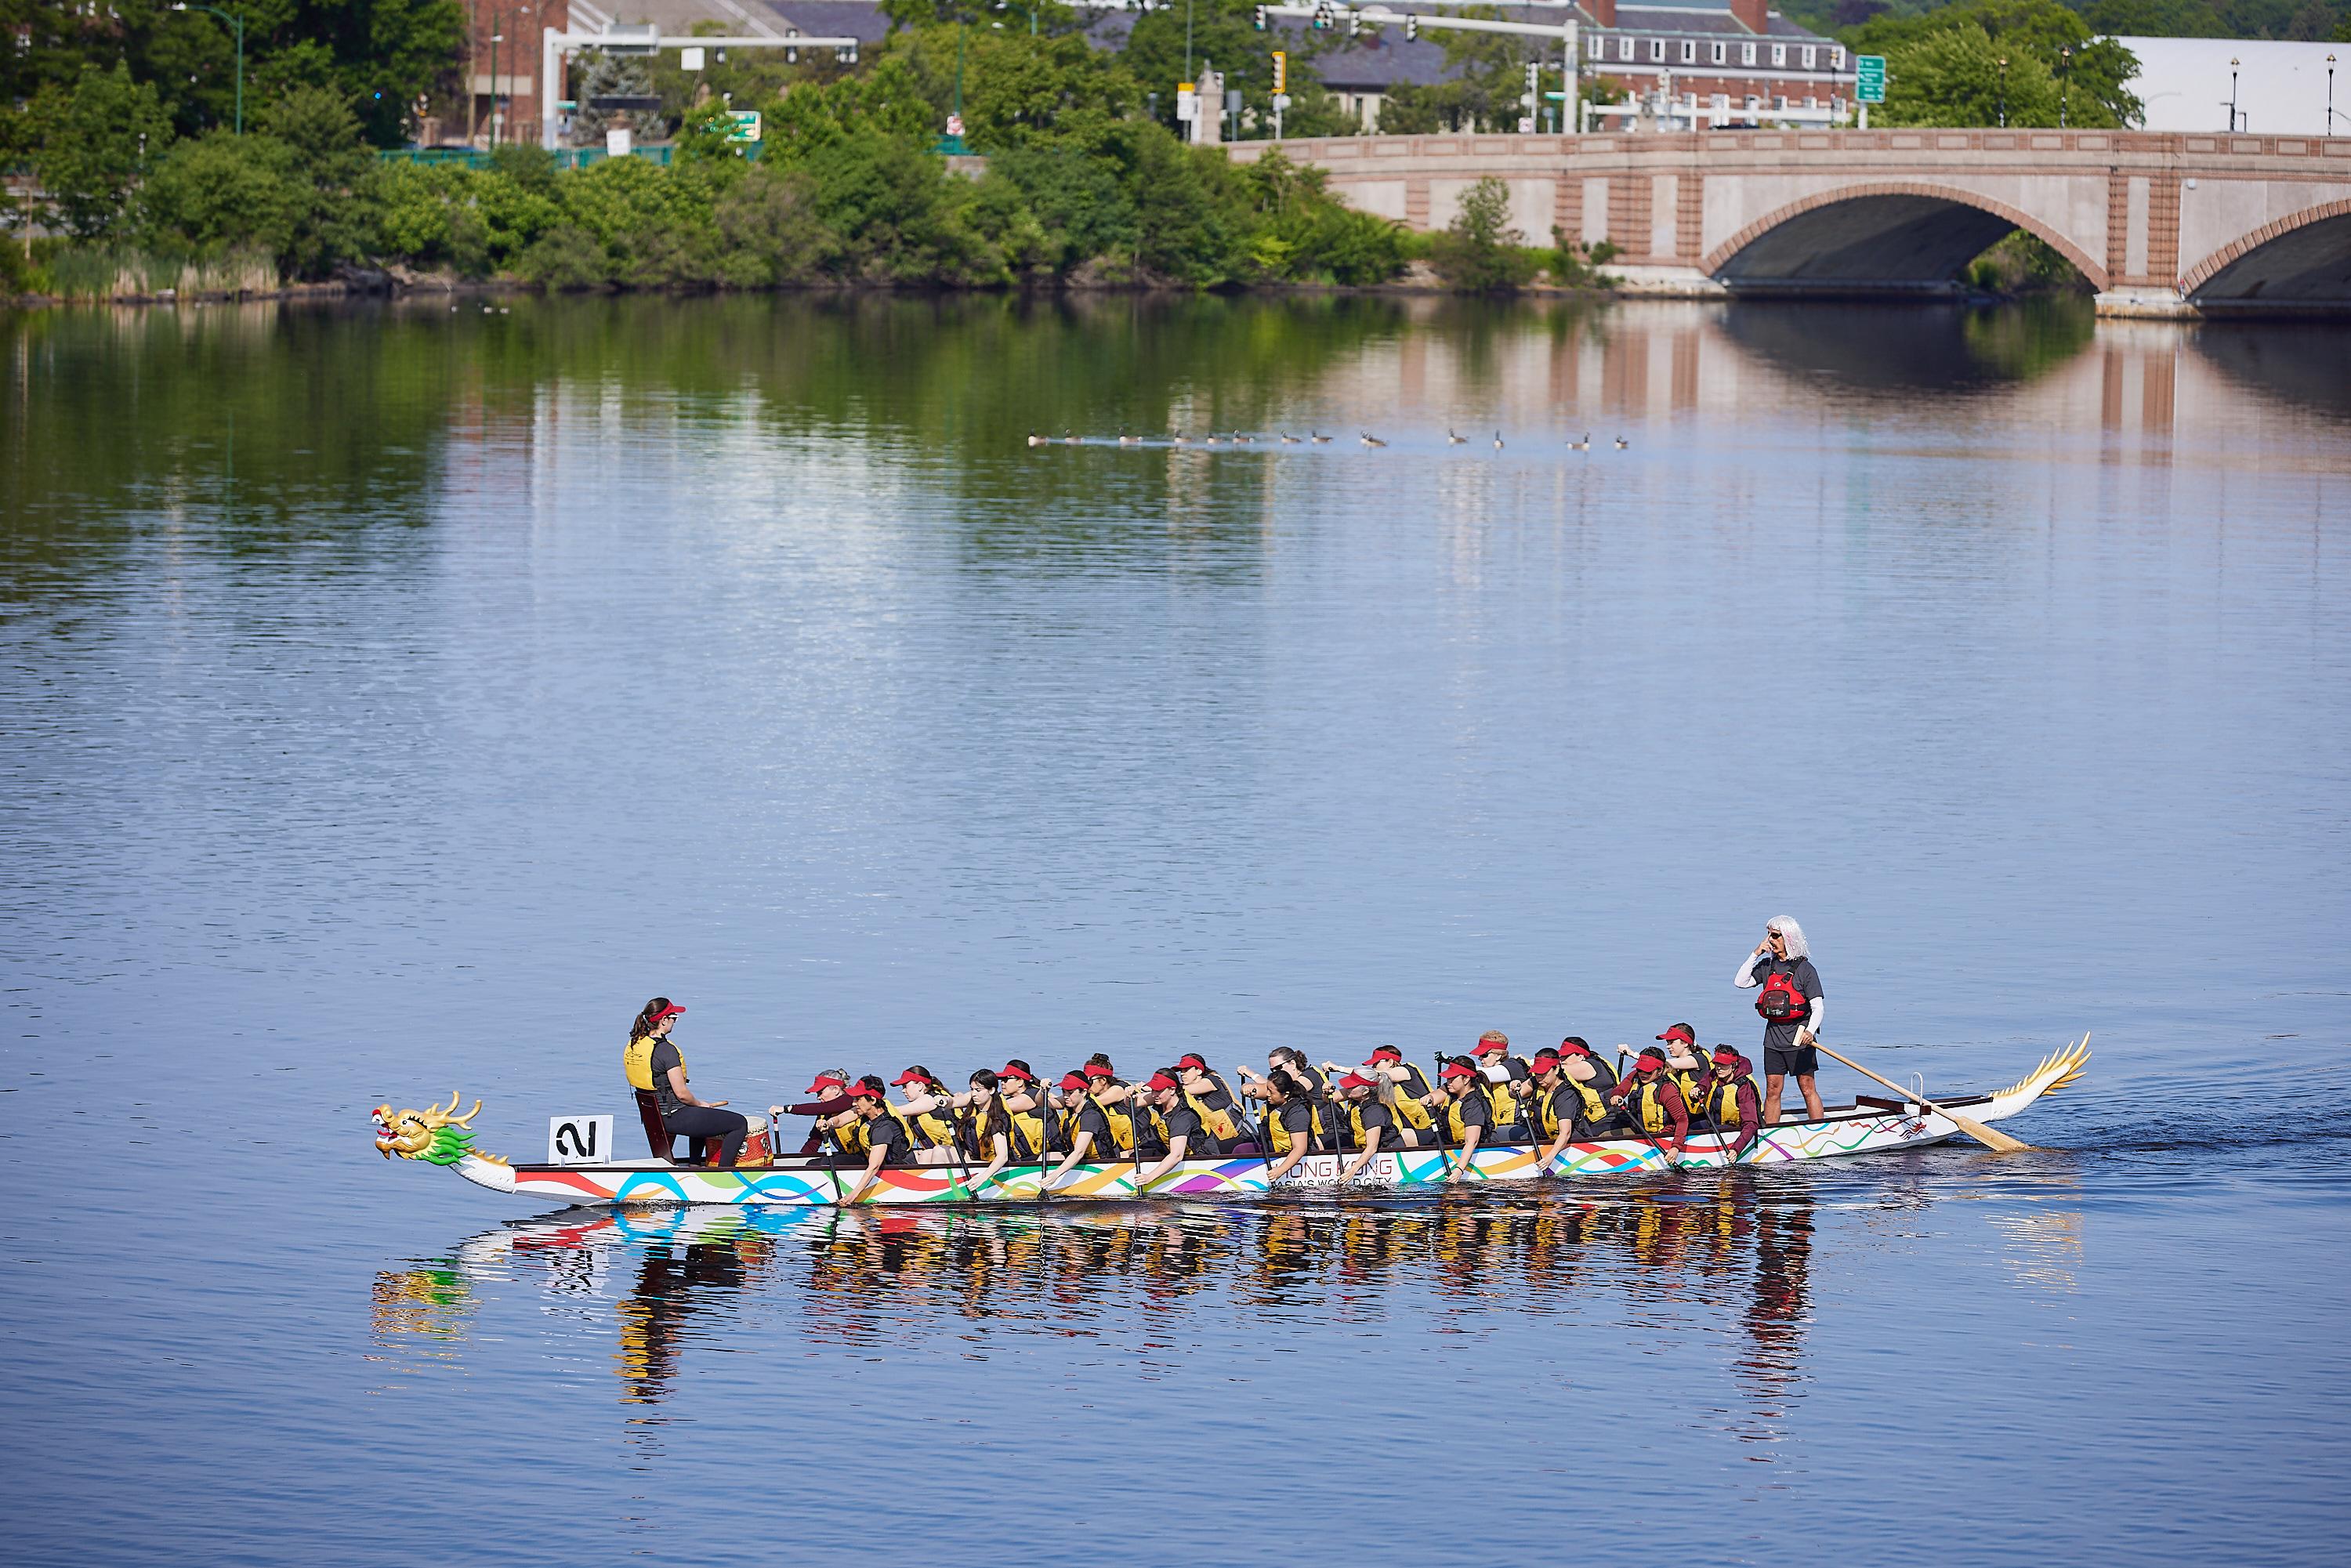 The Hong Kong Economic and Trade Office in New York has donated a new dragonboat to the 44th Boston Hong Kong on Dragon Boat Festival.